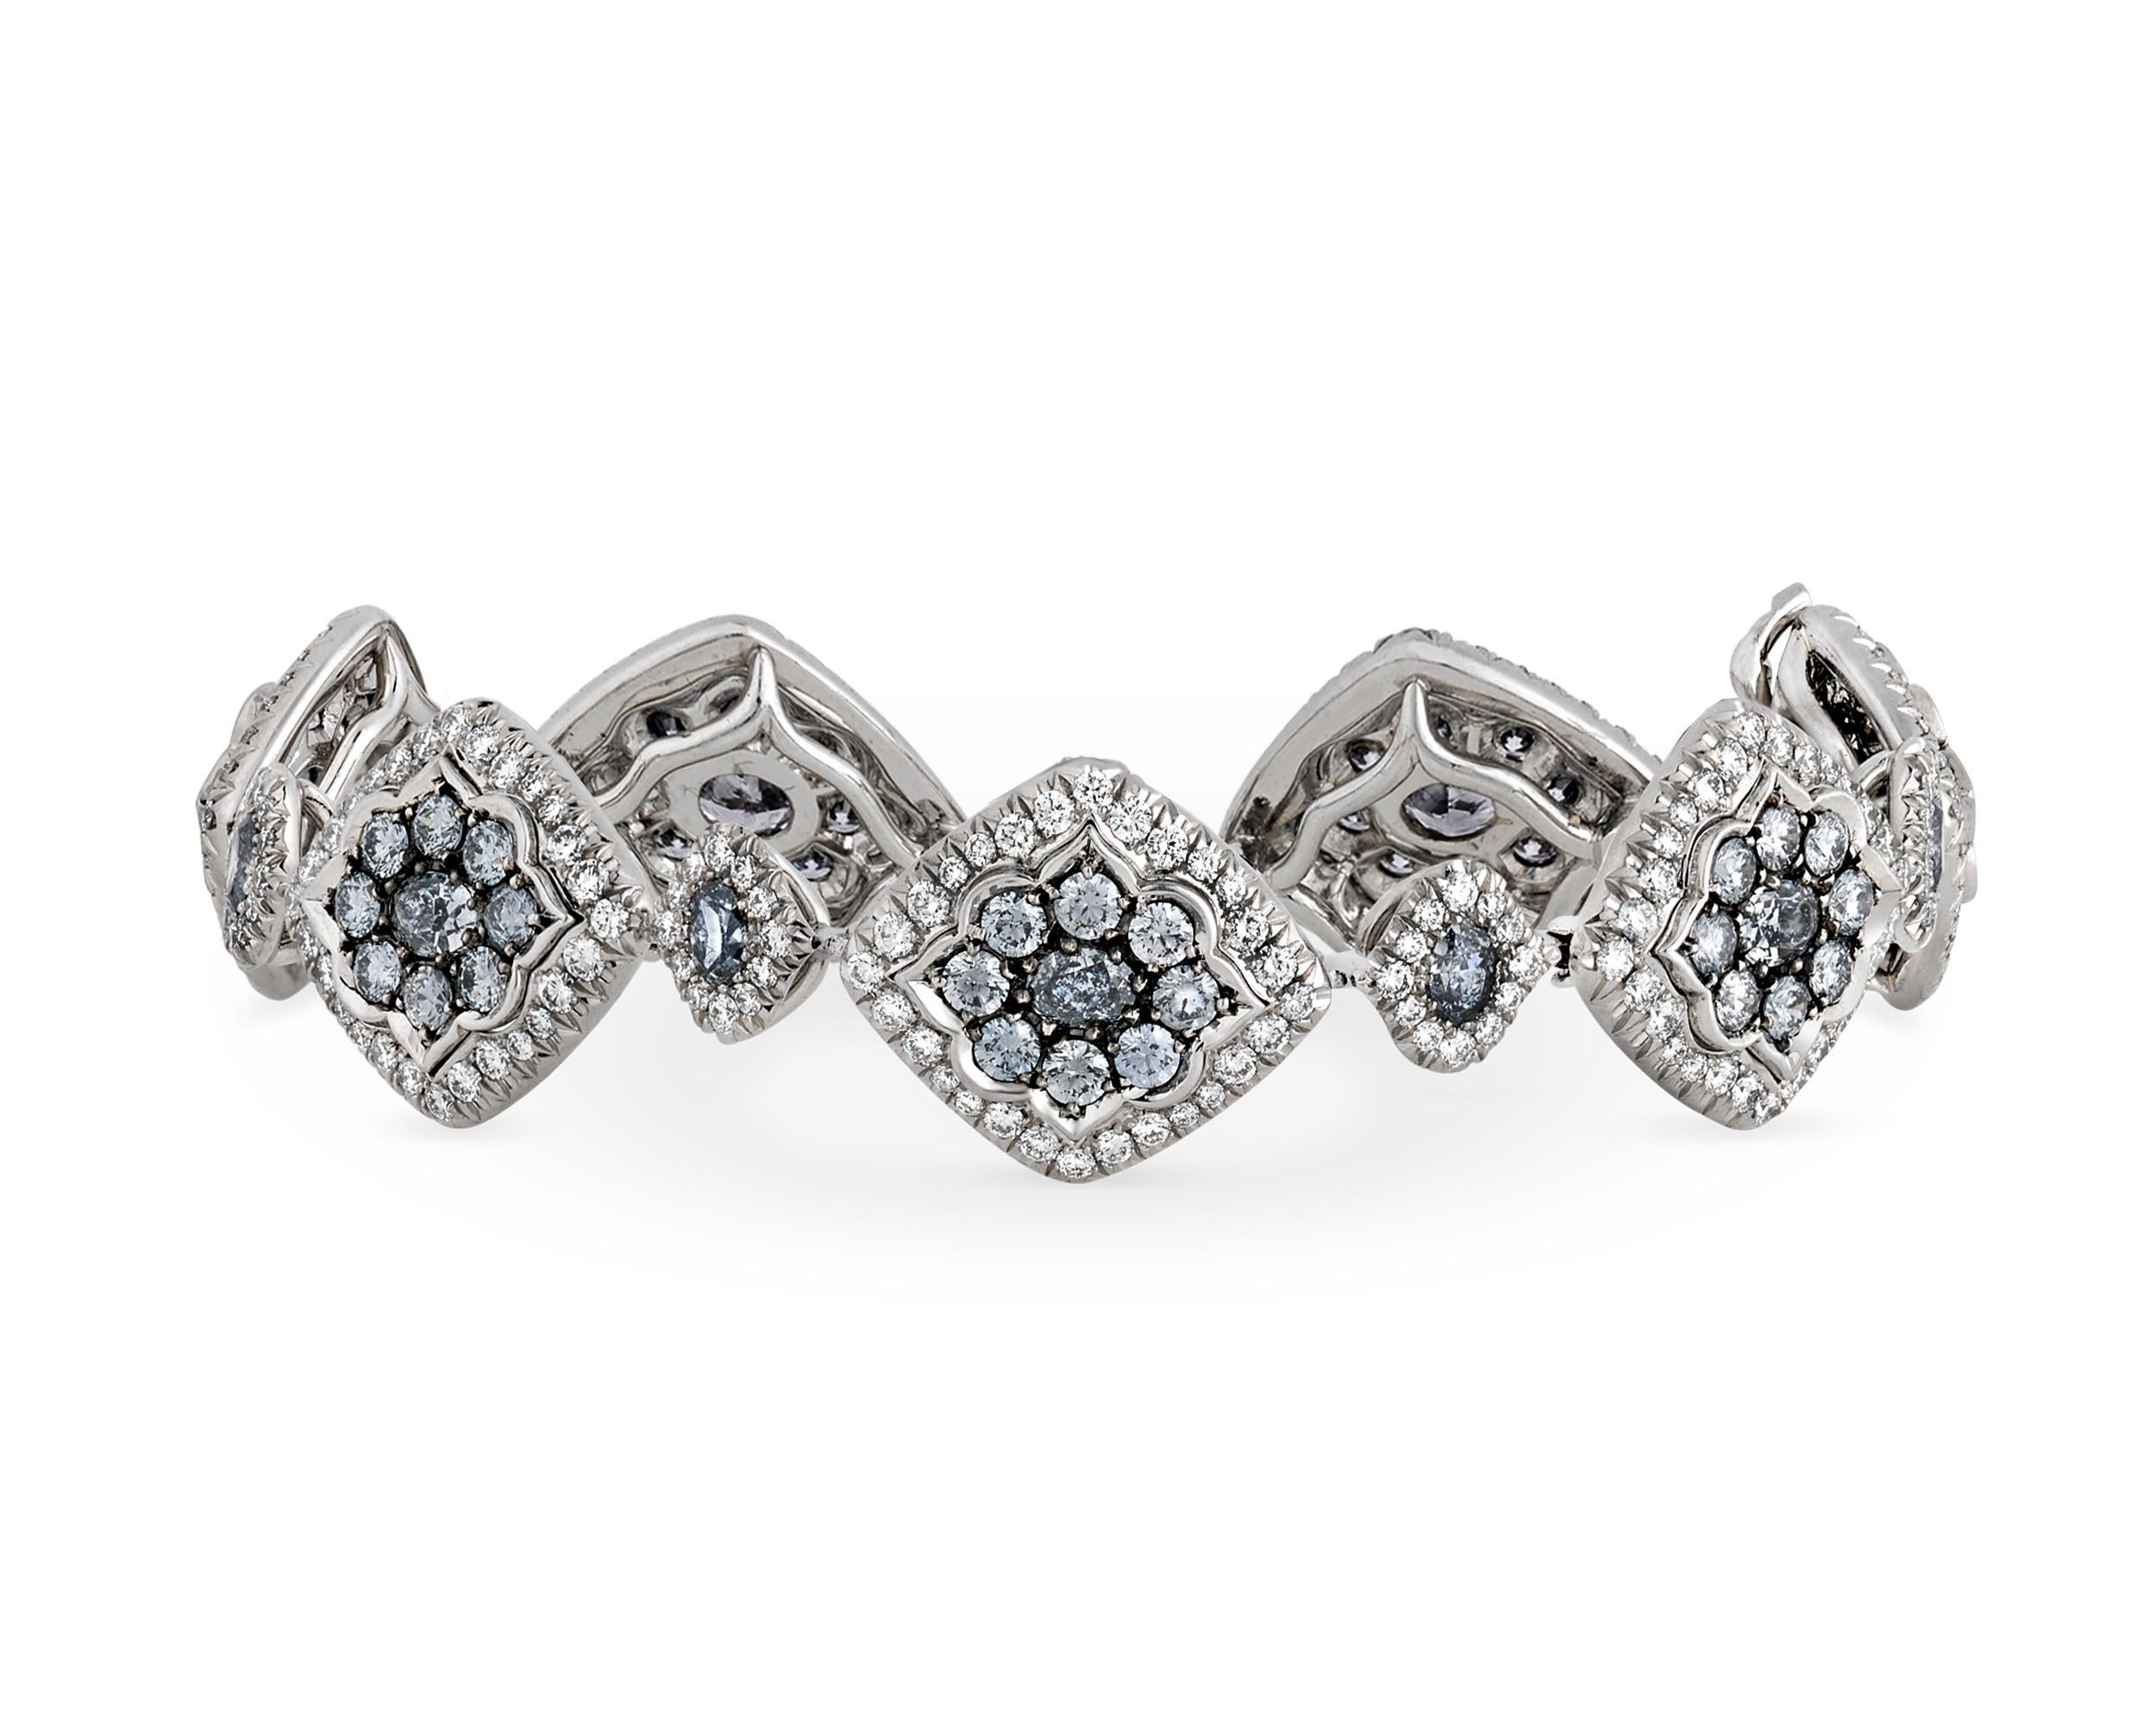 Fourteen exceptionally rare Argyle blue diamonds are featured in this one-of-a-kind bracelet. The highly desirable oval-cut gemstones total 1.85 carats, and each displays the highly unique blue color for which Argyle blue diamonds are renowned. The